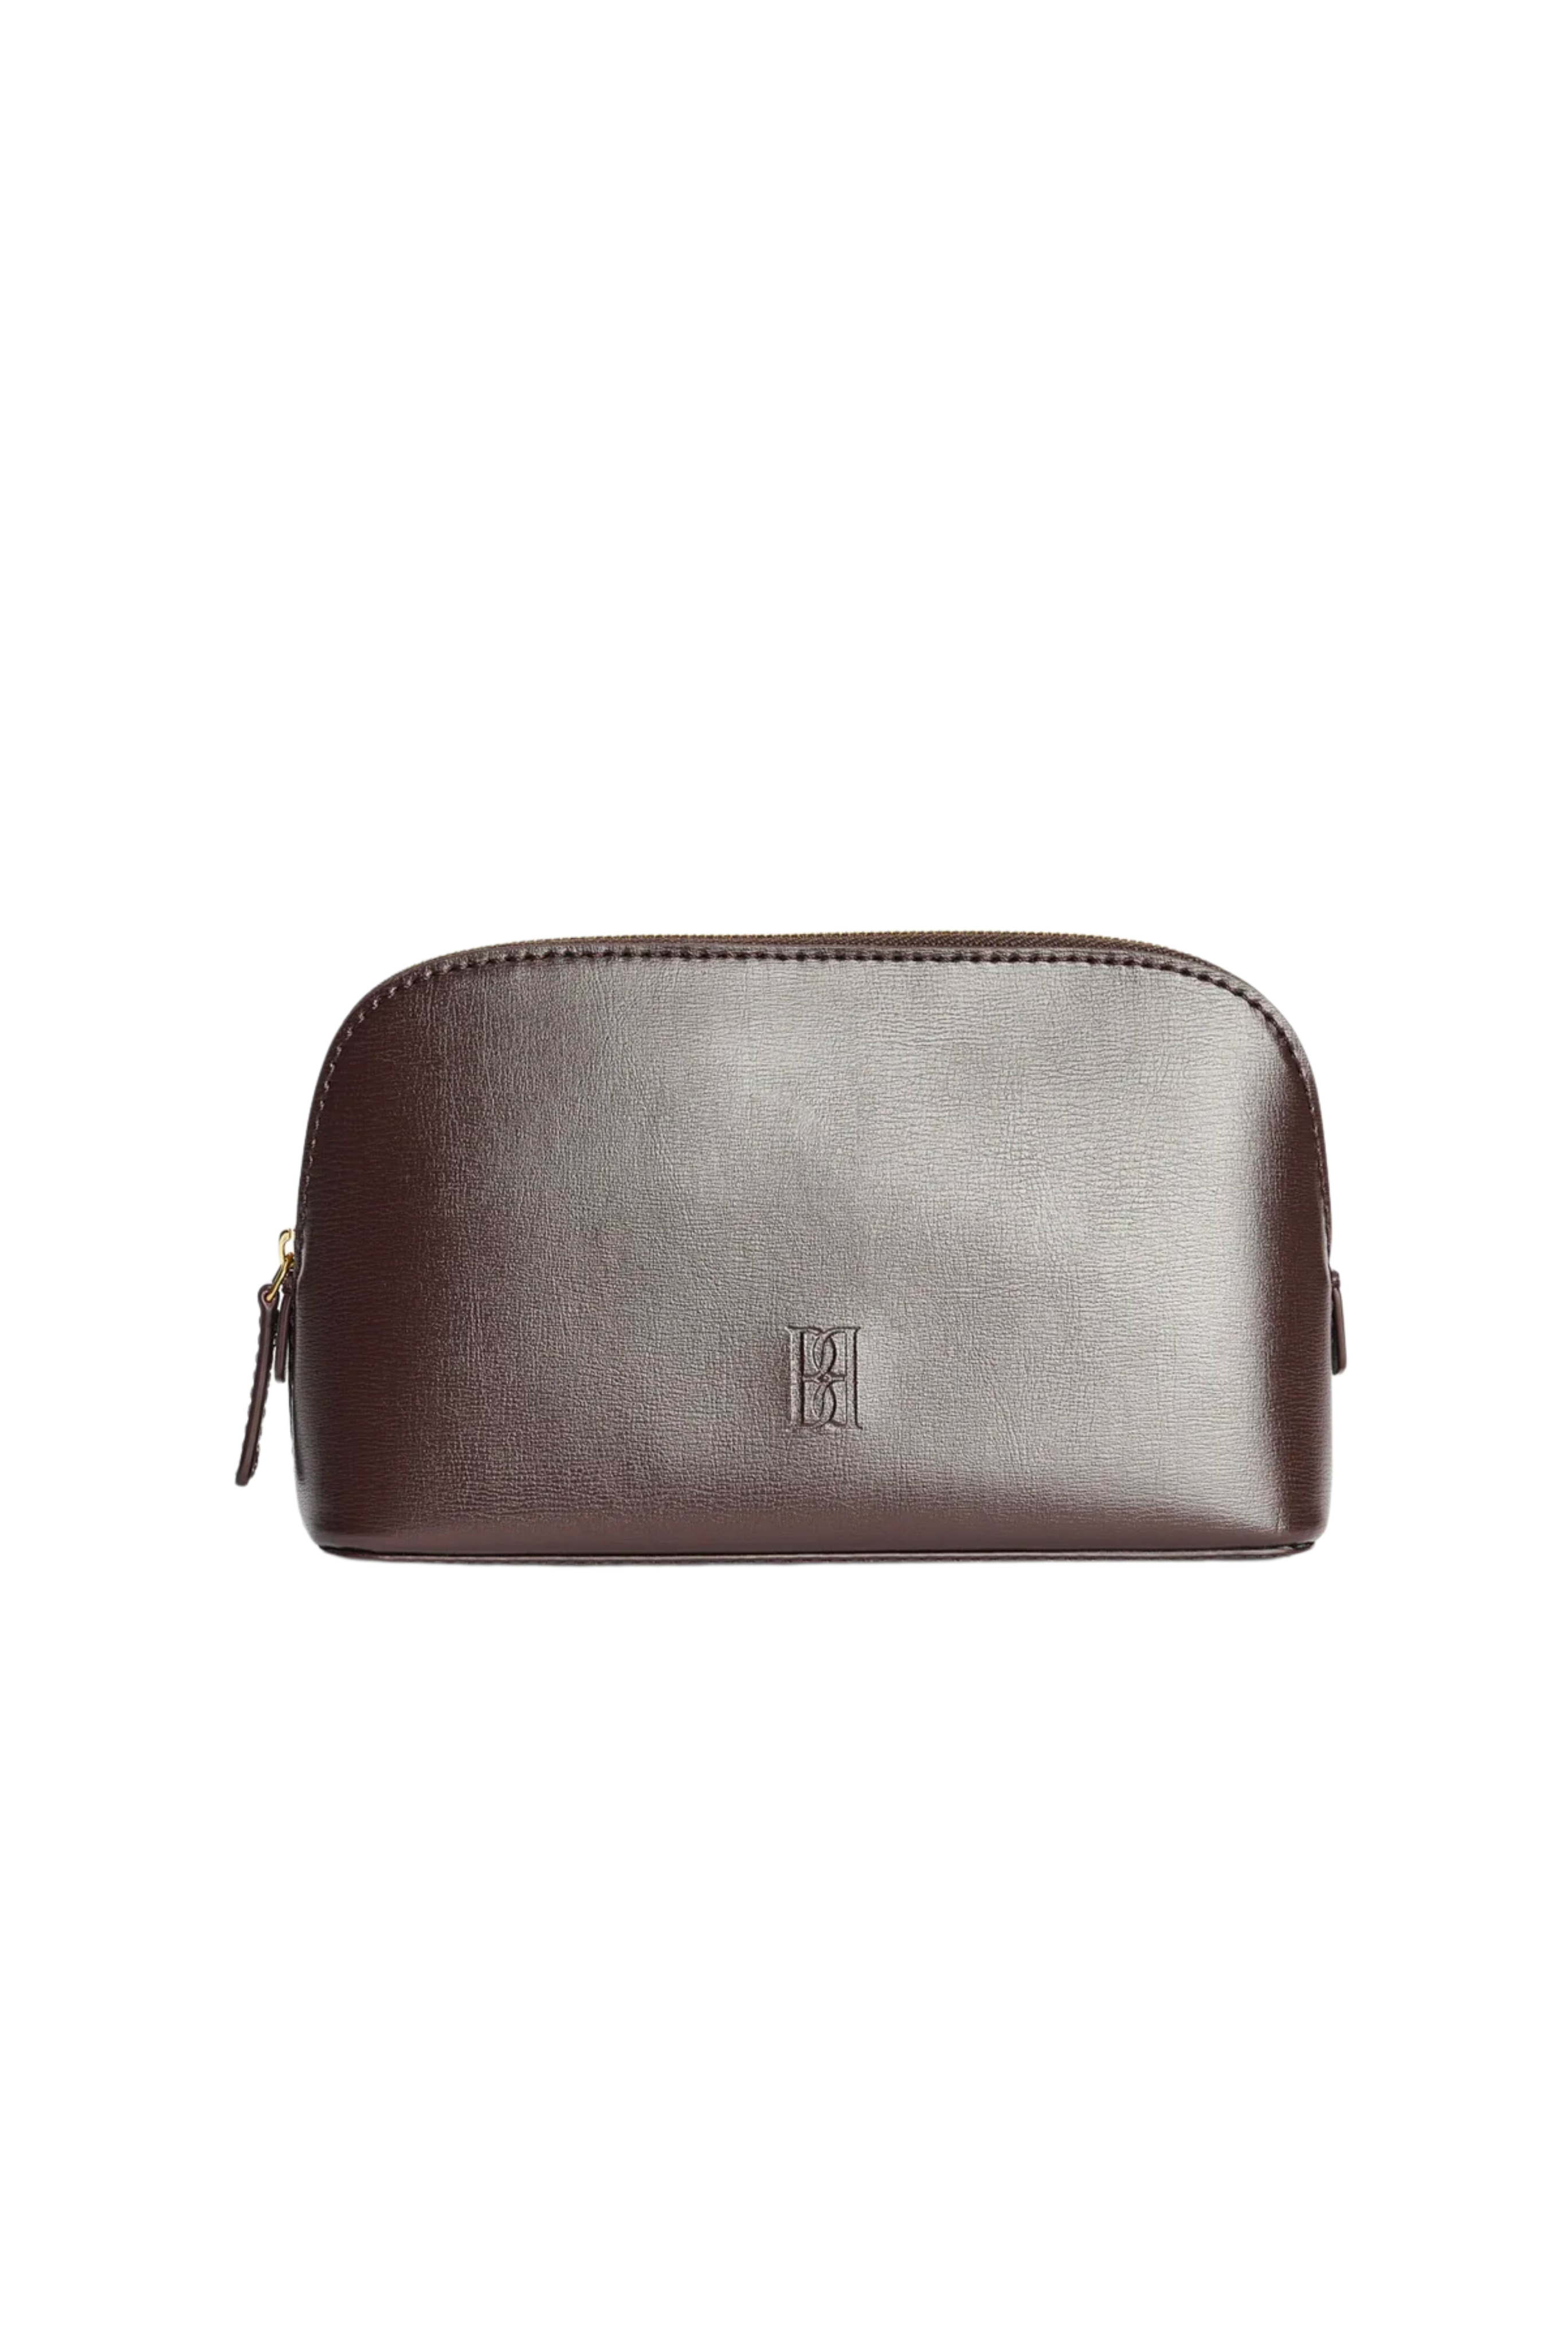 Small Brown Leather Travel Makeup Pouch